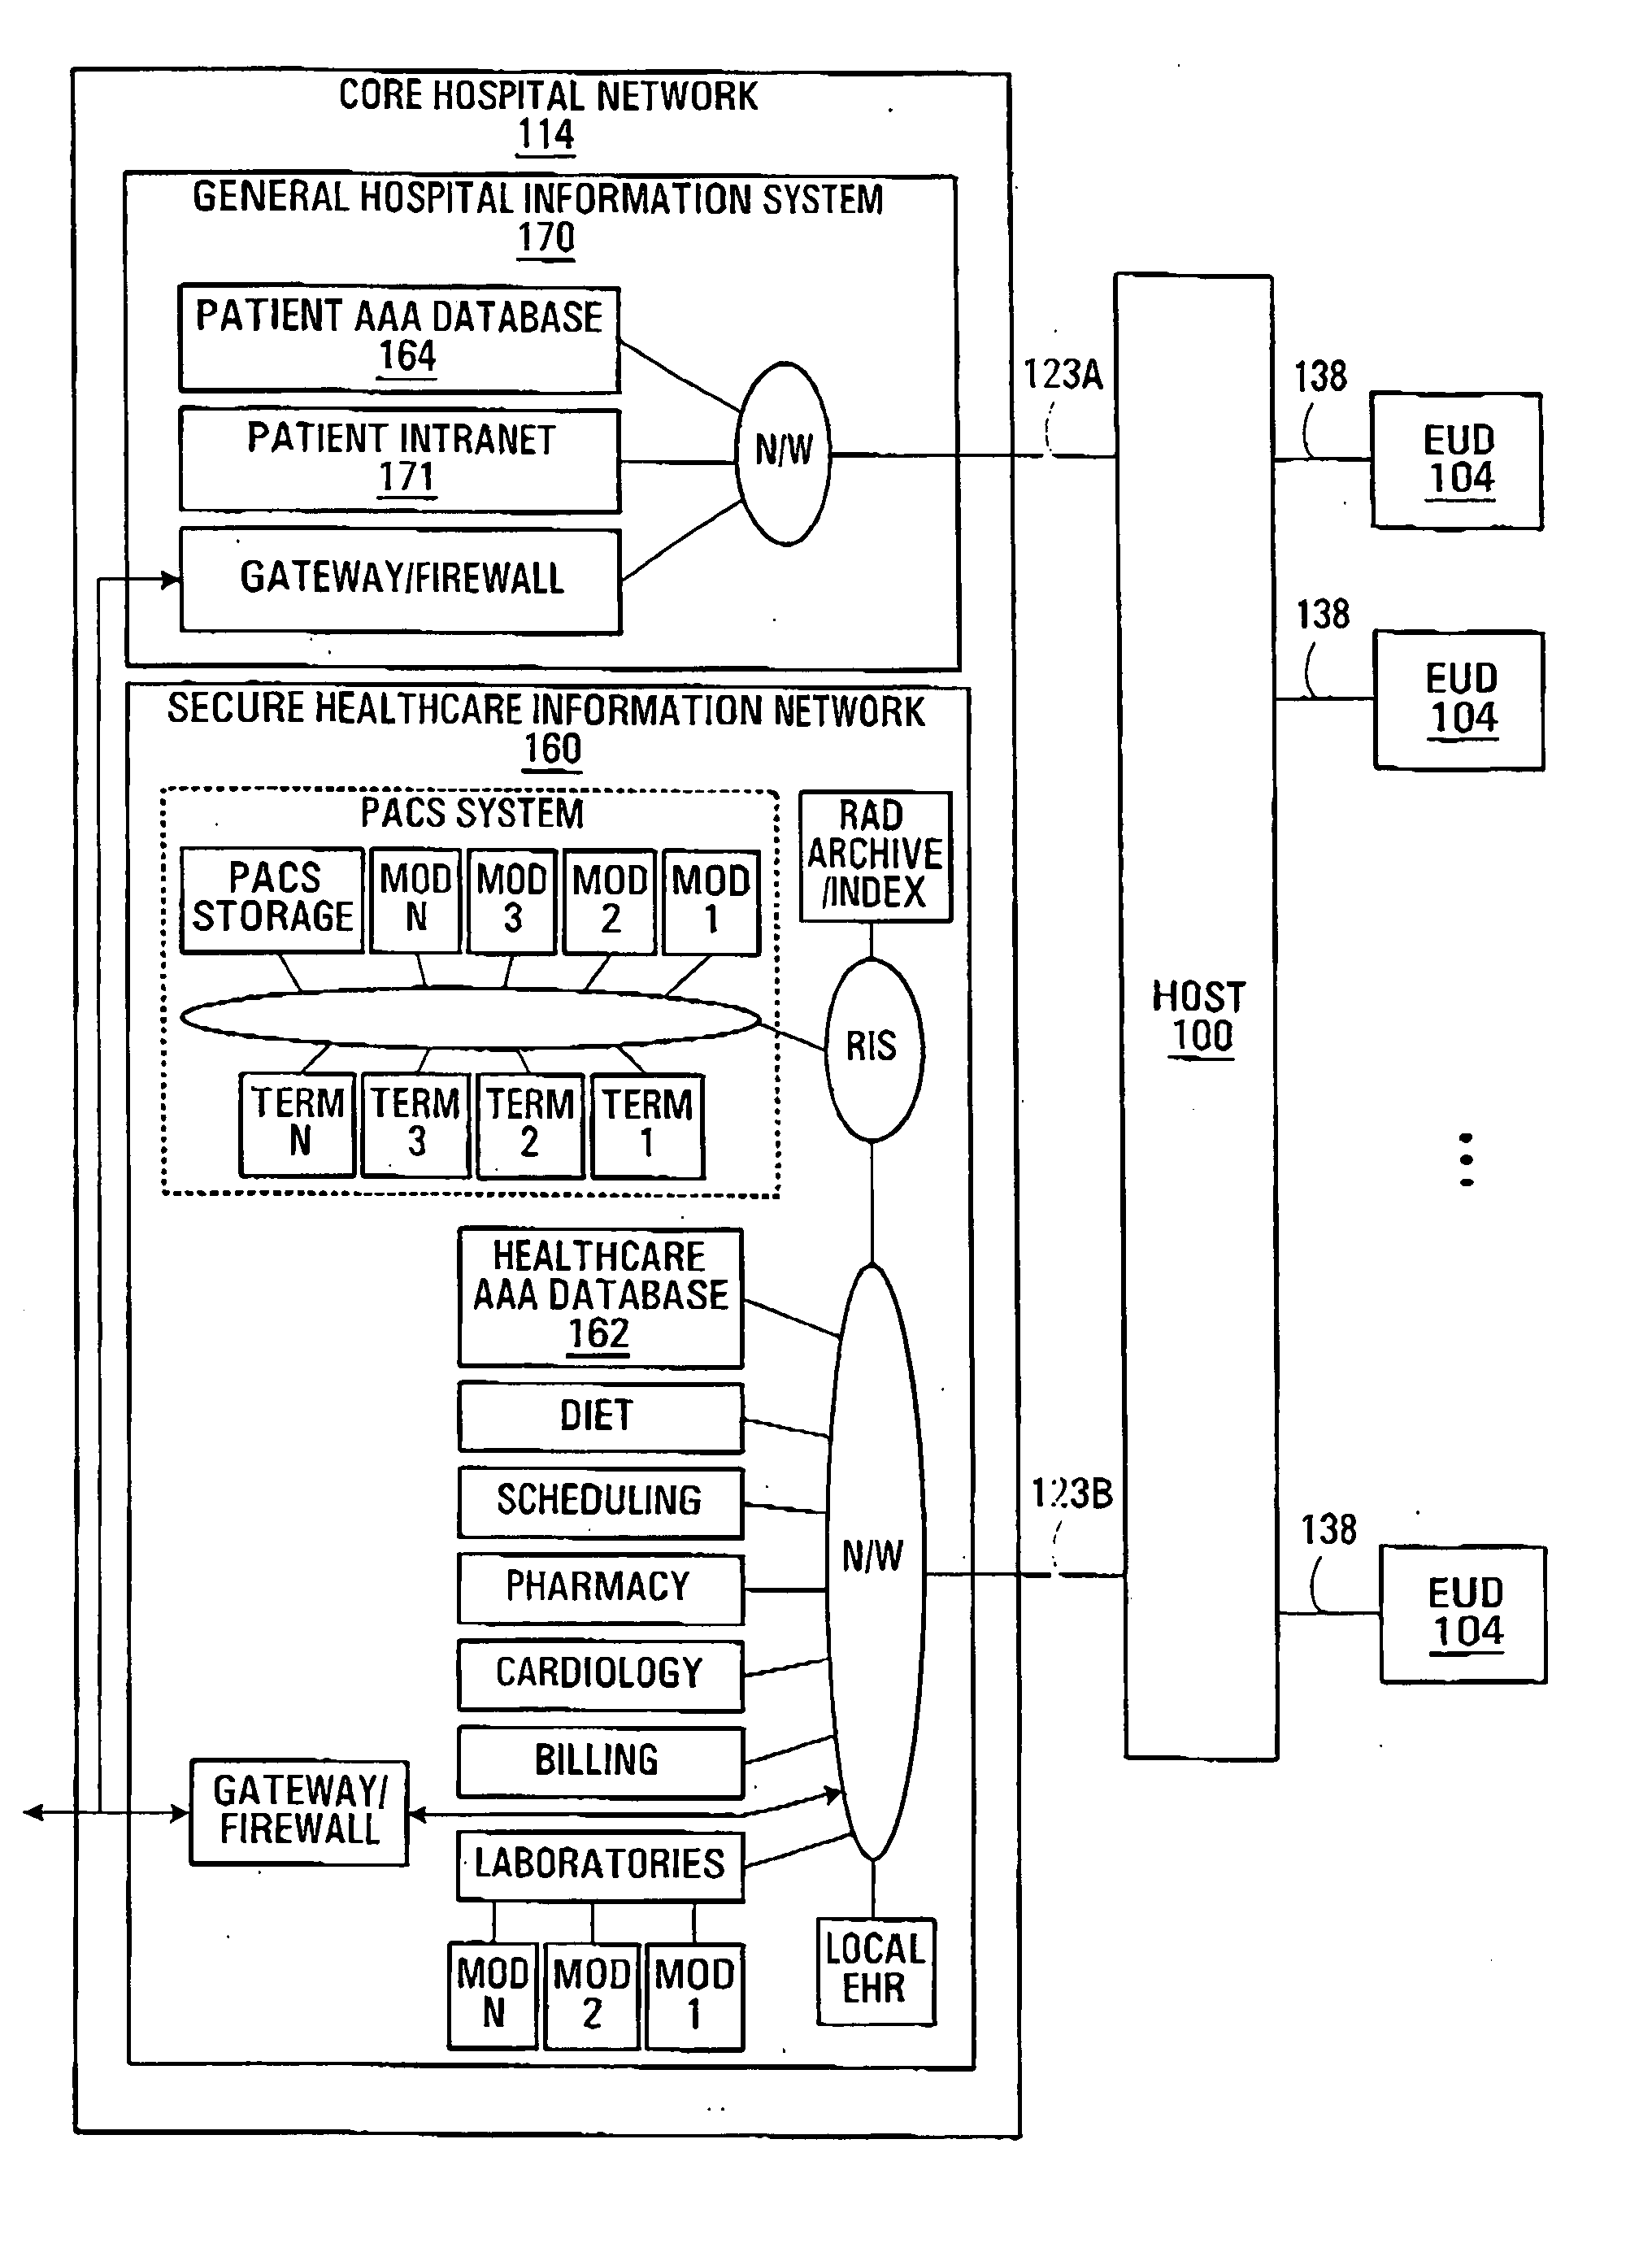 Systems and methods for preventing an attack on healthcare data processing resources in a hospital information system